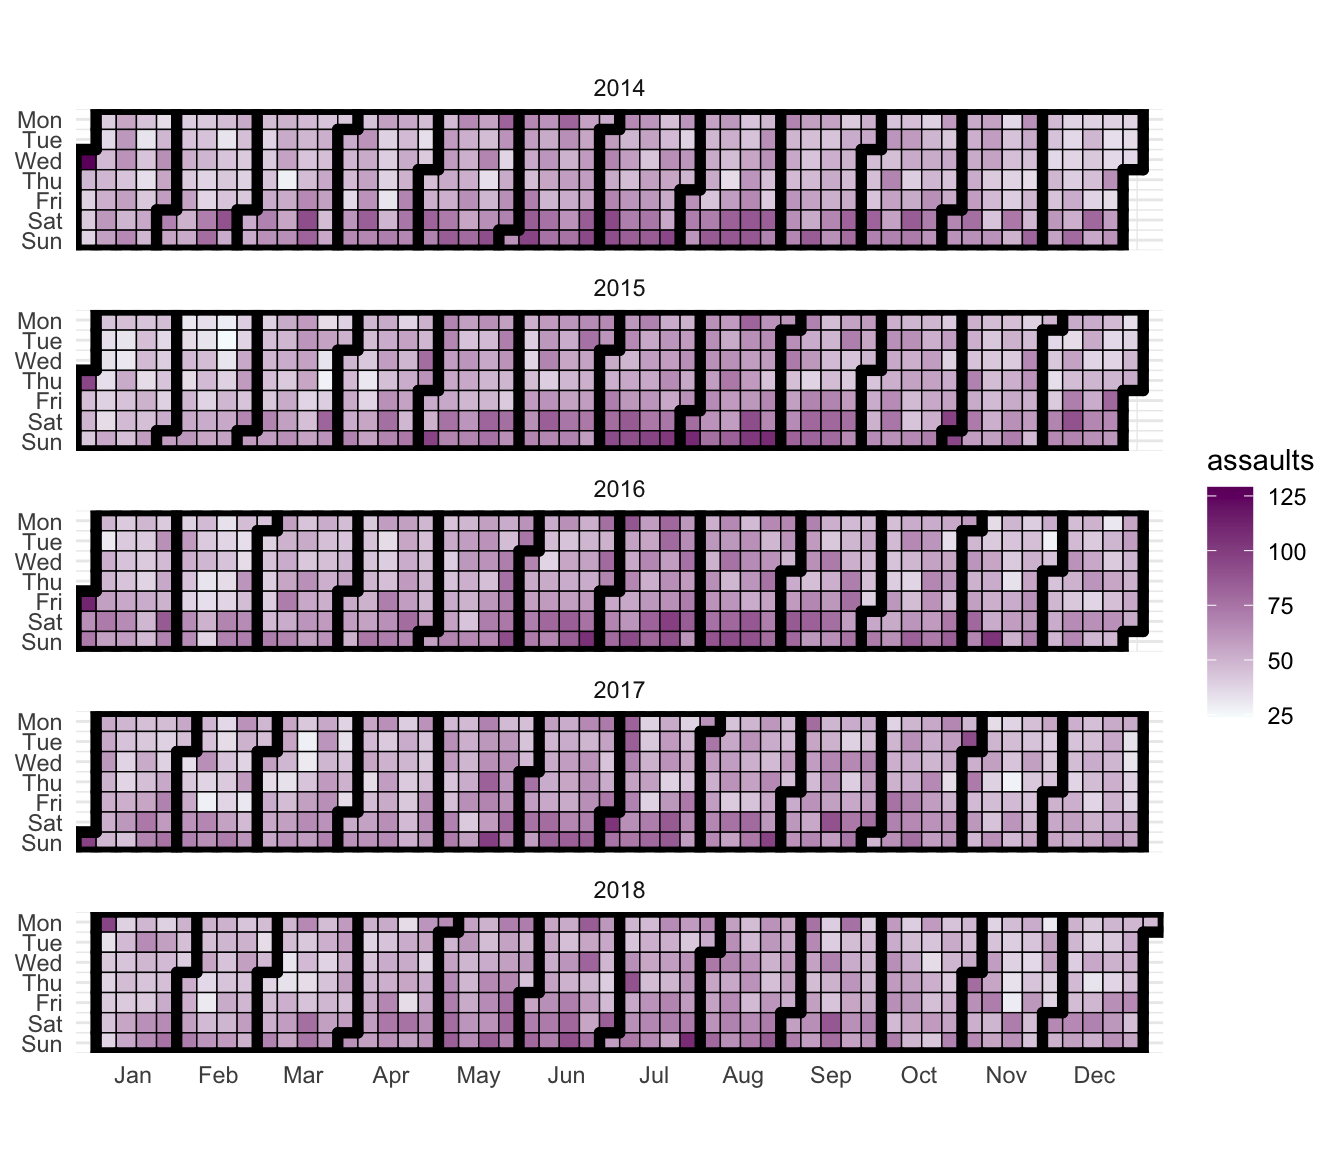 With one row per year, labeled with each year from 2014 to 2018, a grid of shaded squares appears. Each of the five grids is seven cells tall, with labels at the left clarifying them as days Monday, Tuesday, and so on to Sunday. Thick lines in the grid separate the months horizontally, and there are enough cells to cover each year. To the right of these grids, a legend labeled 'assaults' matches a gradient from purple to white with numbers from one hundred twenty five down to twenty five. In general, each year the summer months are shaded darker, and the weekends look darker than the weeks. Some notable days, such as new years' are also darker.